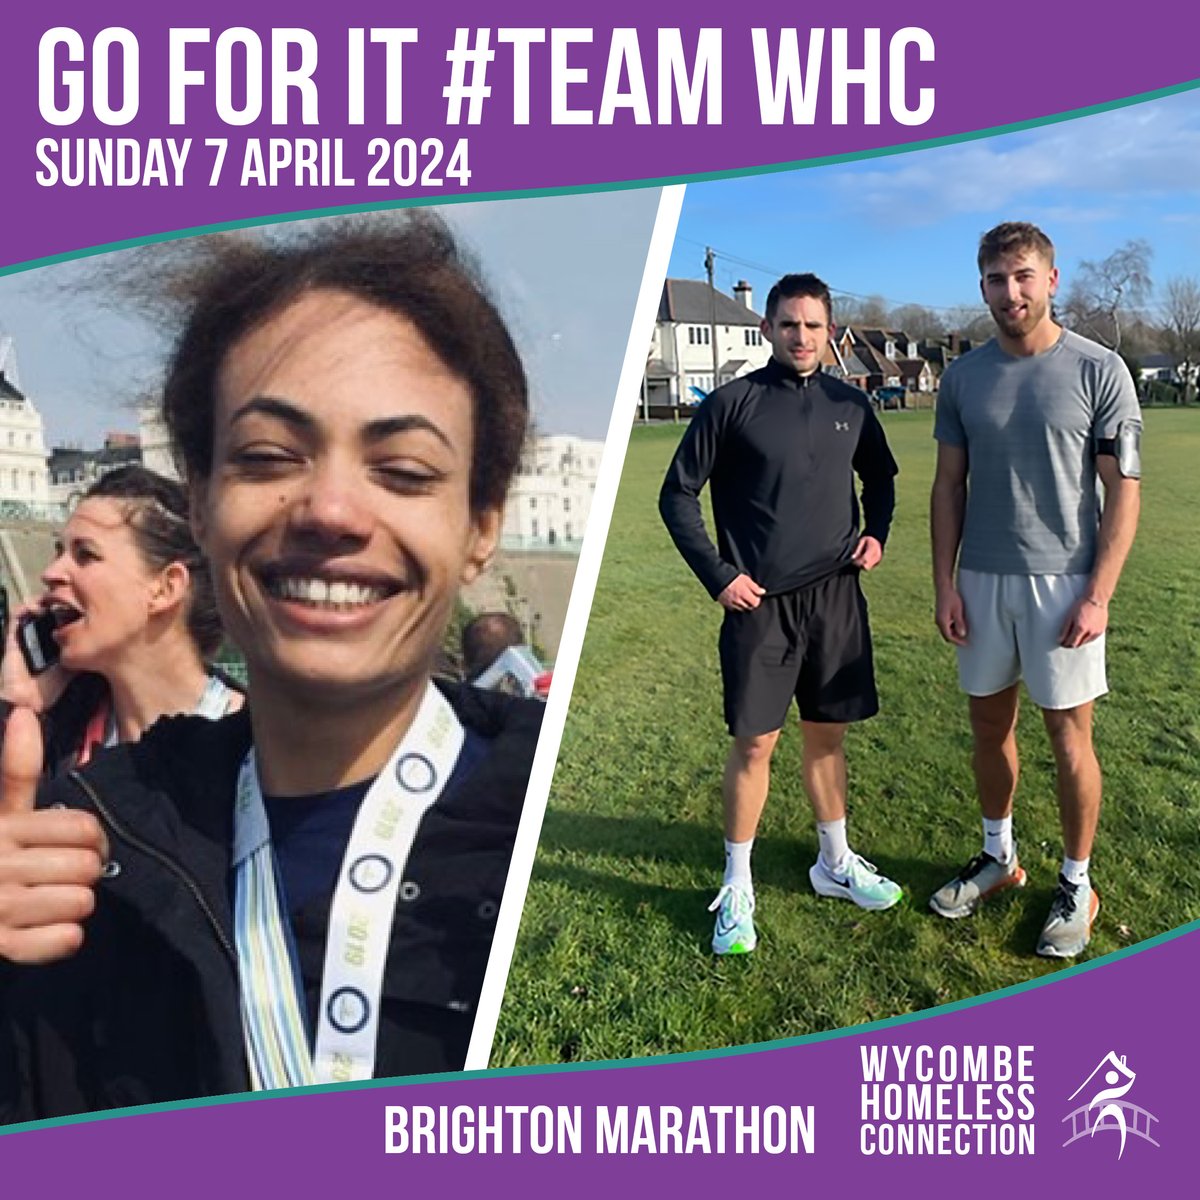 The Brighton Marathon is today! The amazing Deborah and Elliot and Adam are running to raise money for Wycombe Homeless Connection. If you would like to sponsor them you can via JustGiving: Deborah: justgiving.com/page/deborah-w… Elliot and Adam: justgiving.com/page/elliot-he…